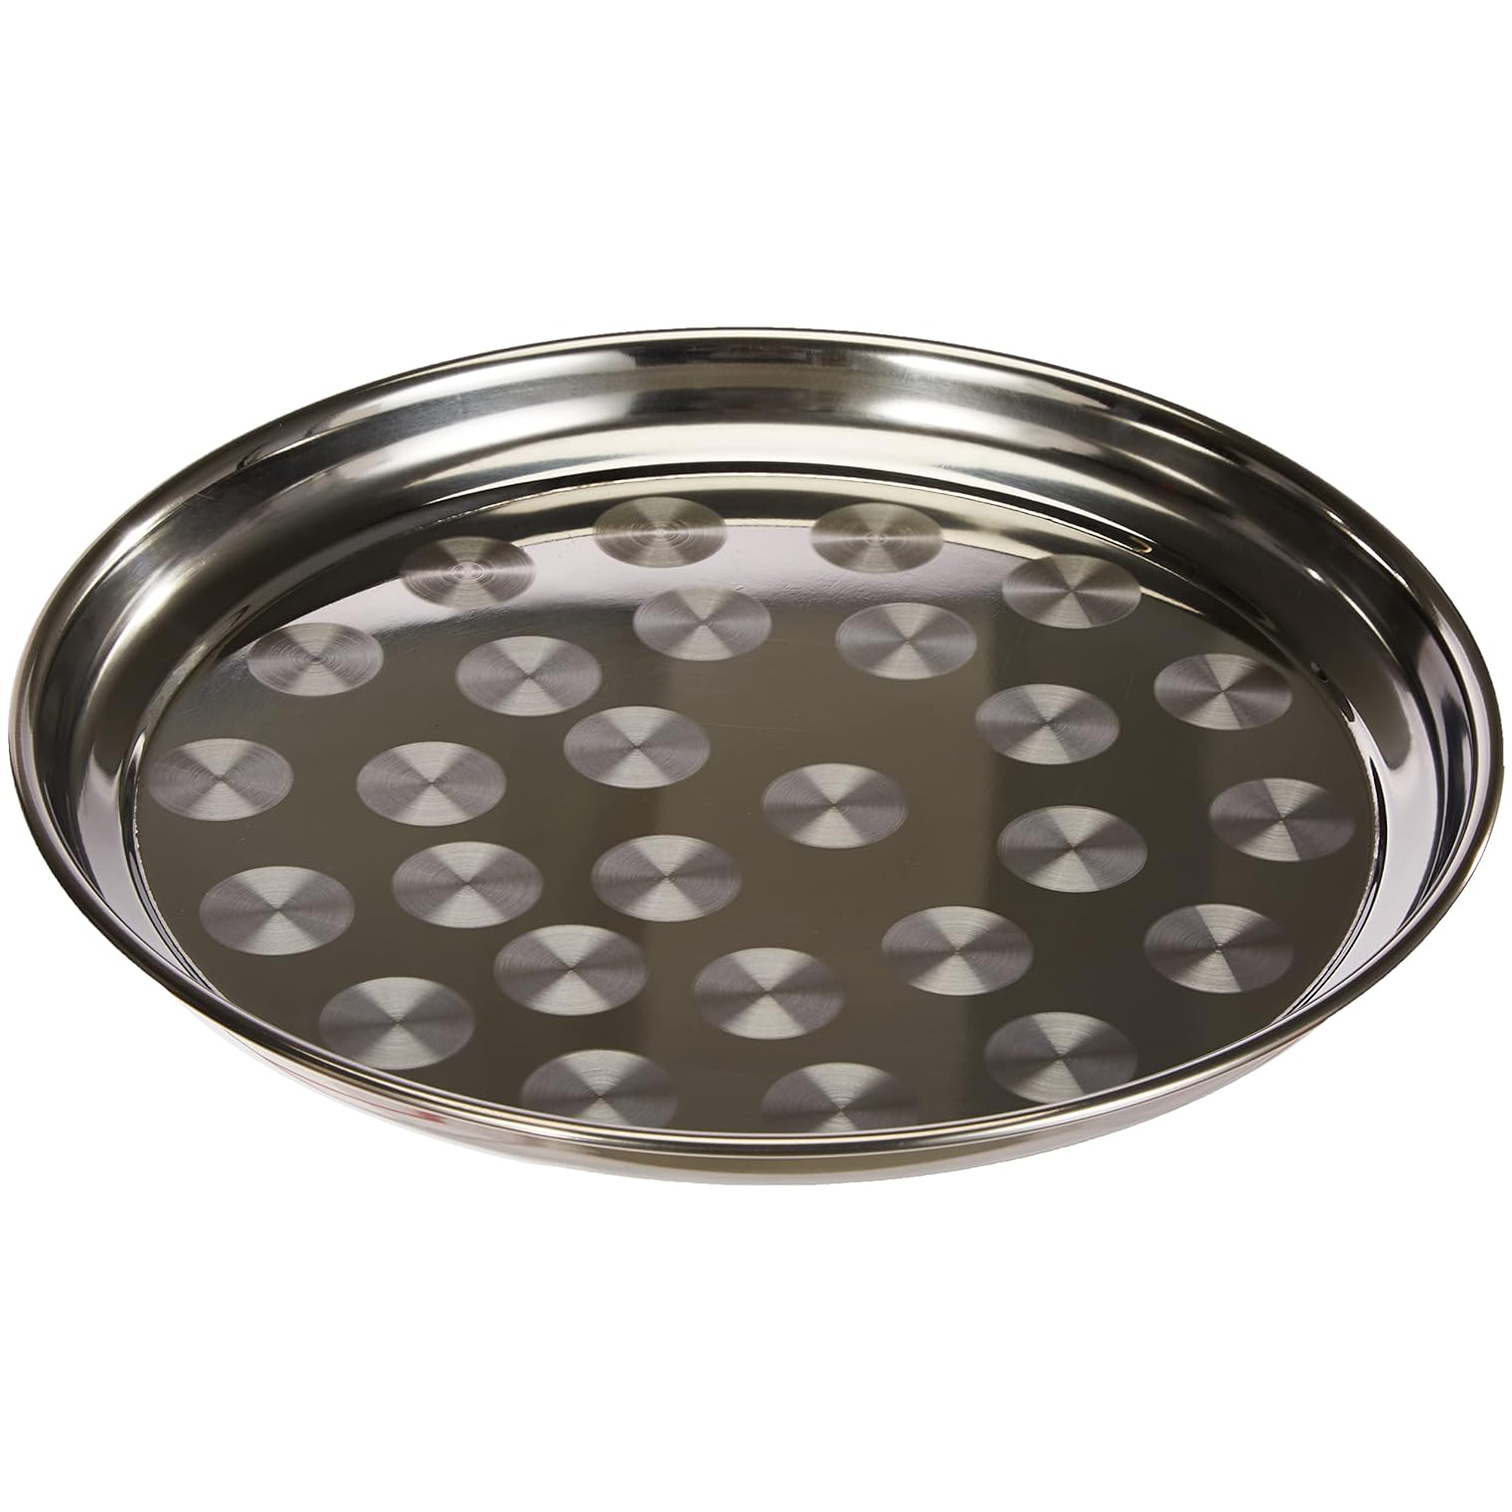 Stainless steel round tray with swirl pattern, serving/display tray